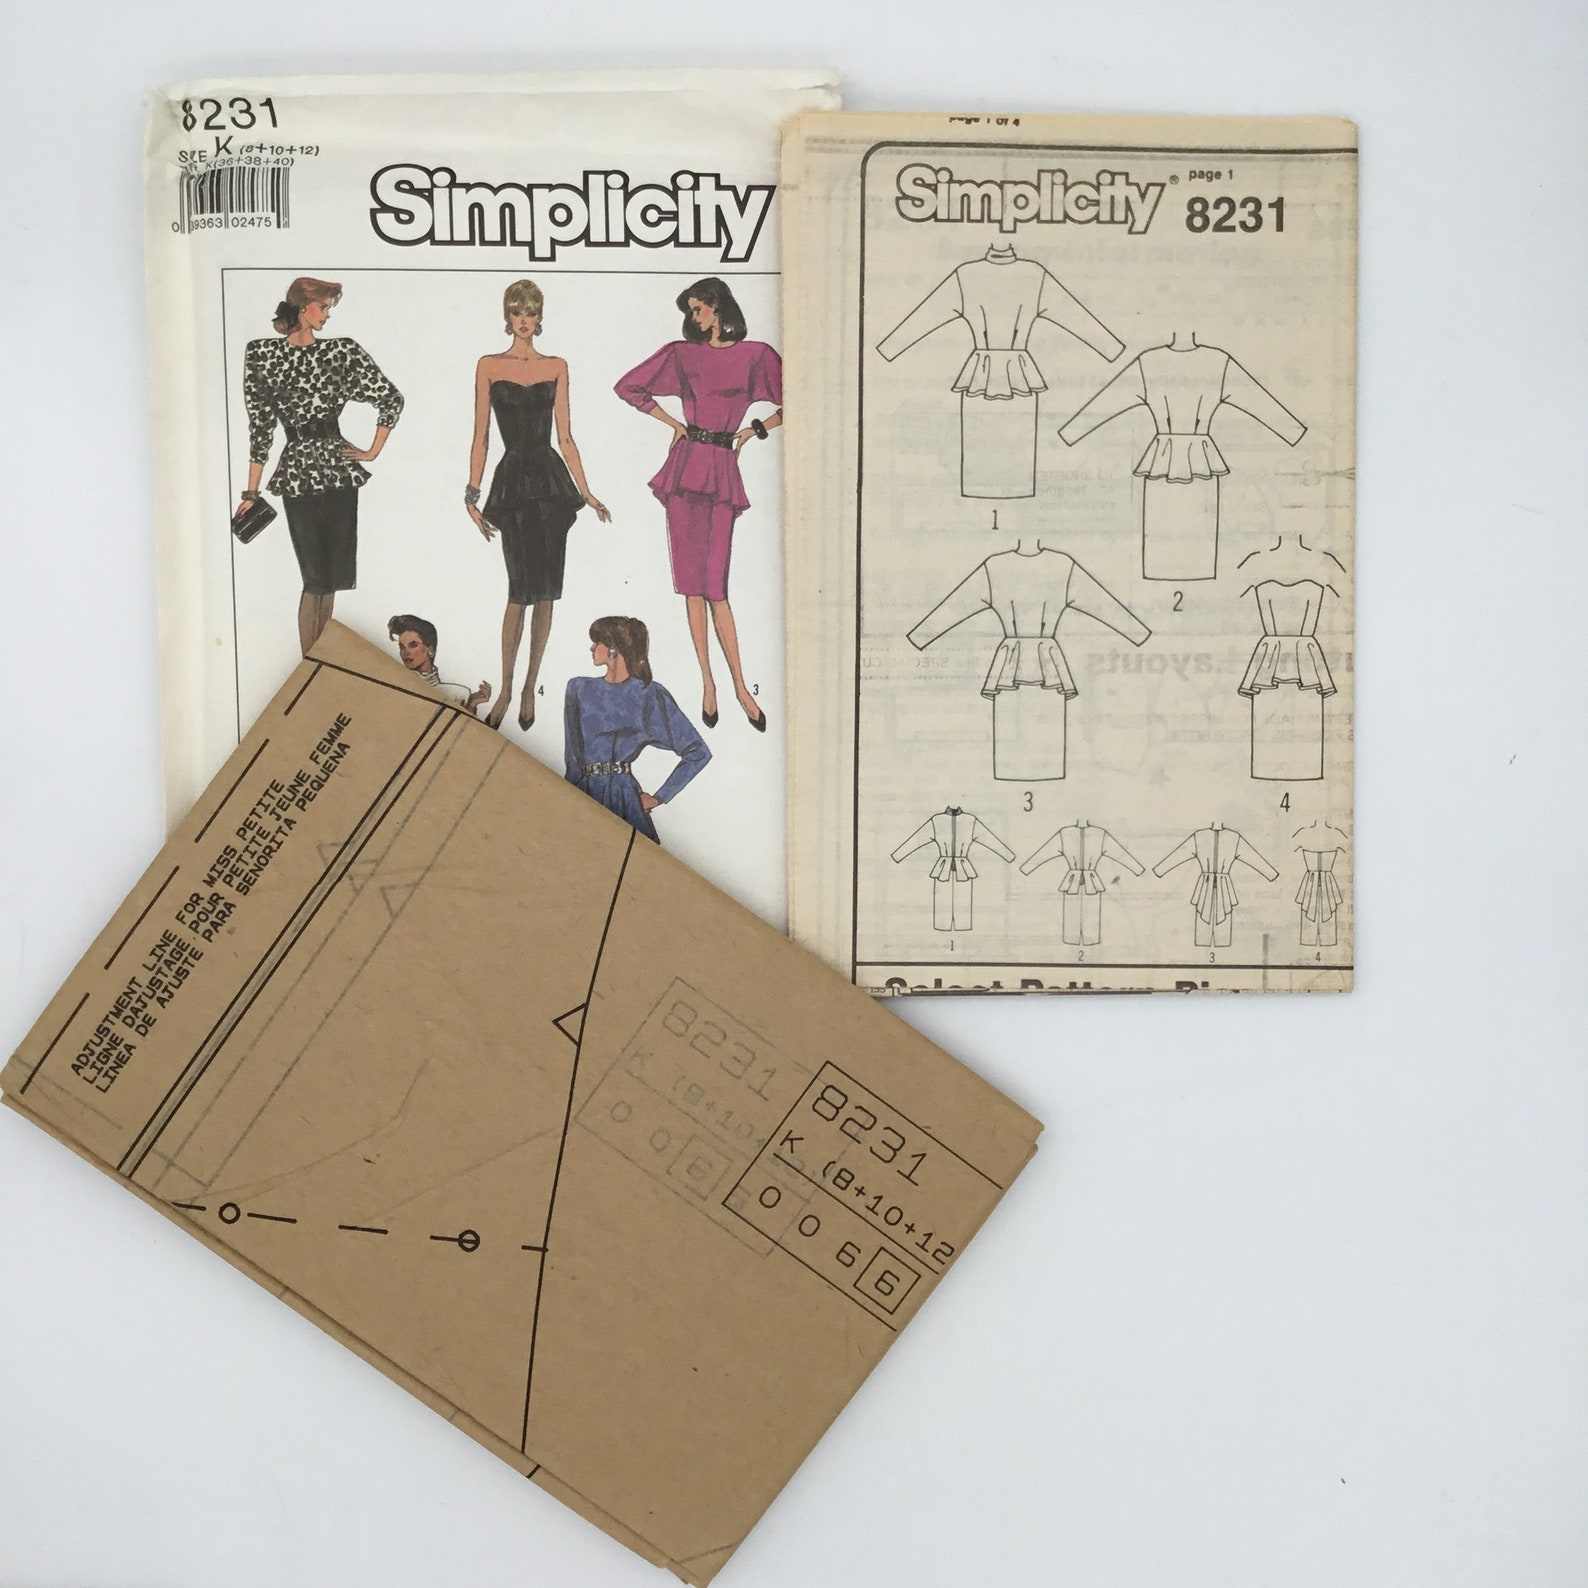 Simplicity 8231 1987 Dress with Neckline and Sleeve | Etsy